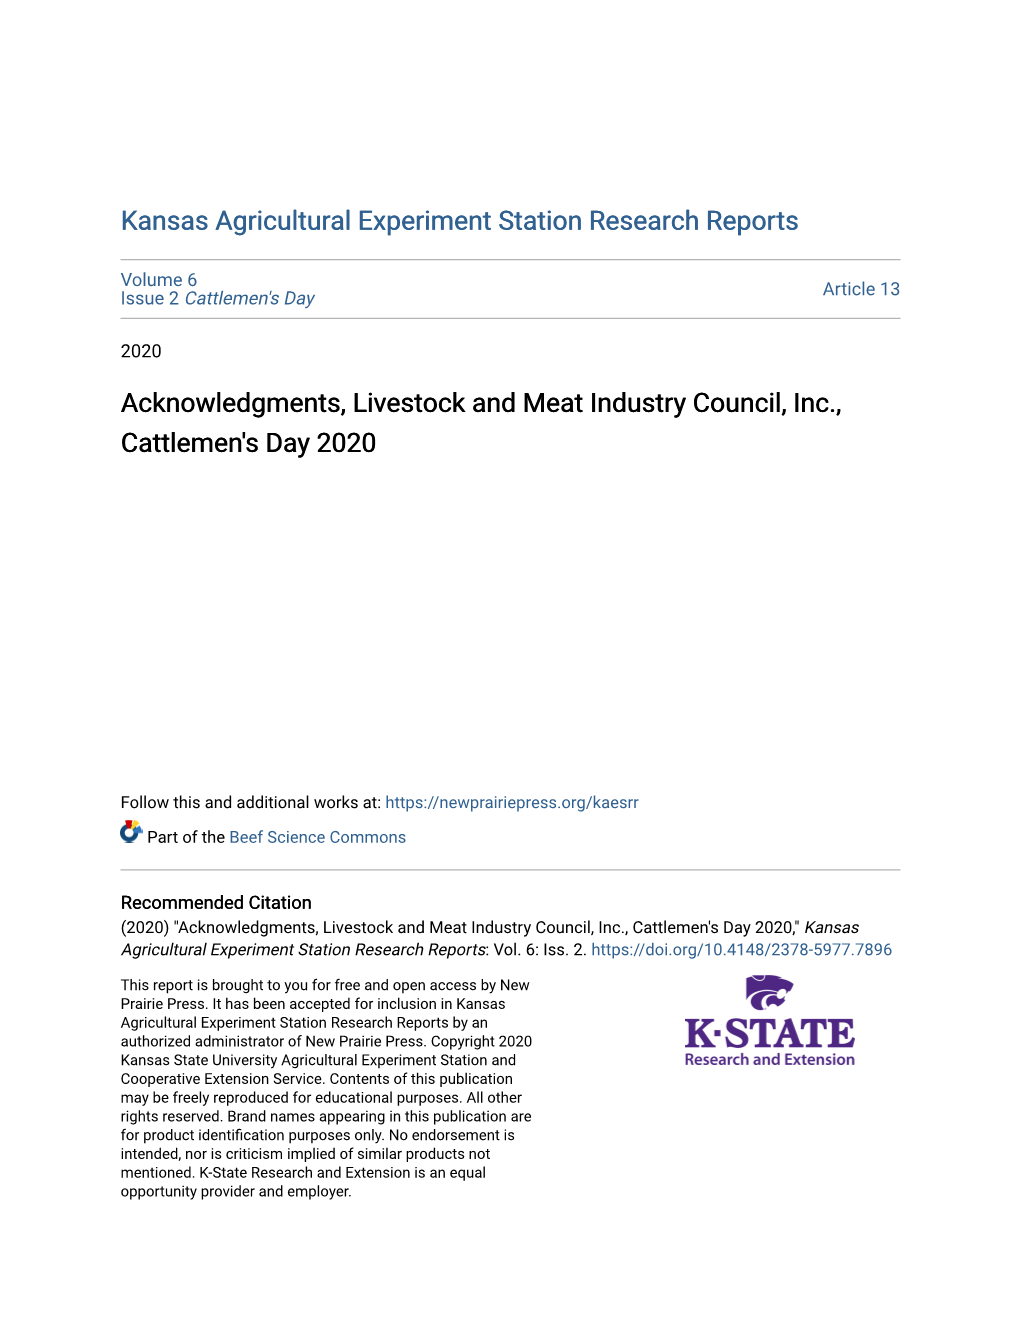 Acknowledgments, Livestock and Meat Industry Council, Inc., Cattlemen's Day 2020